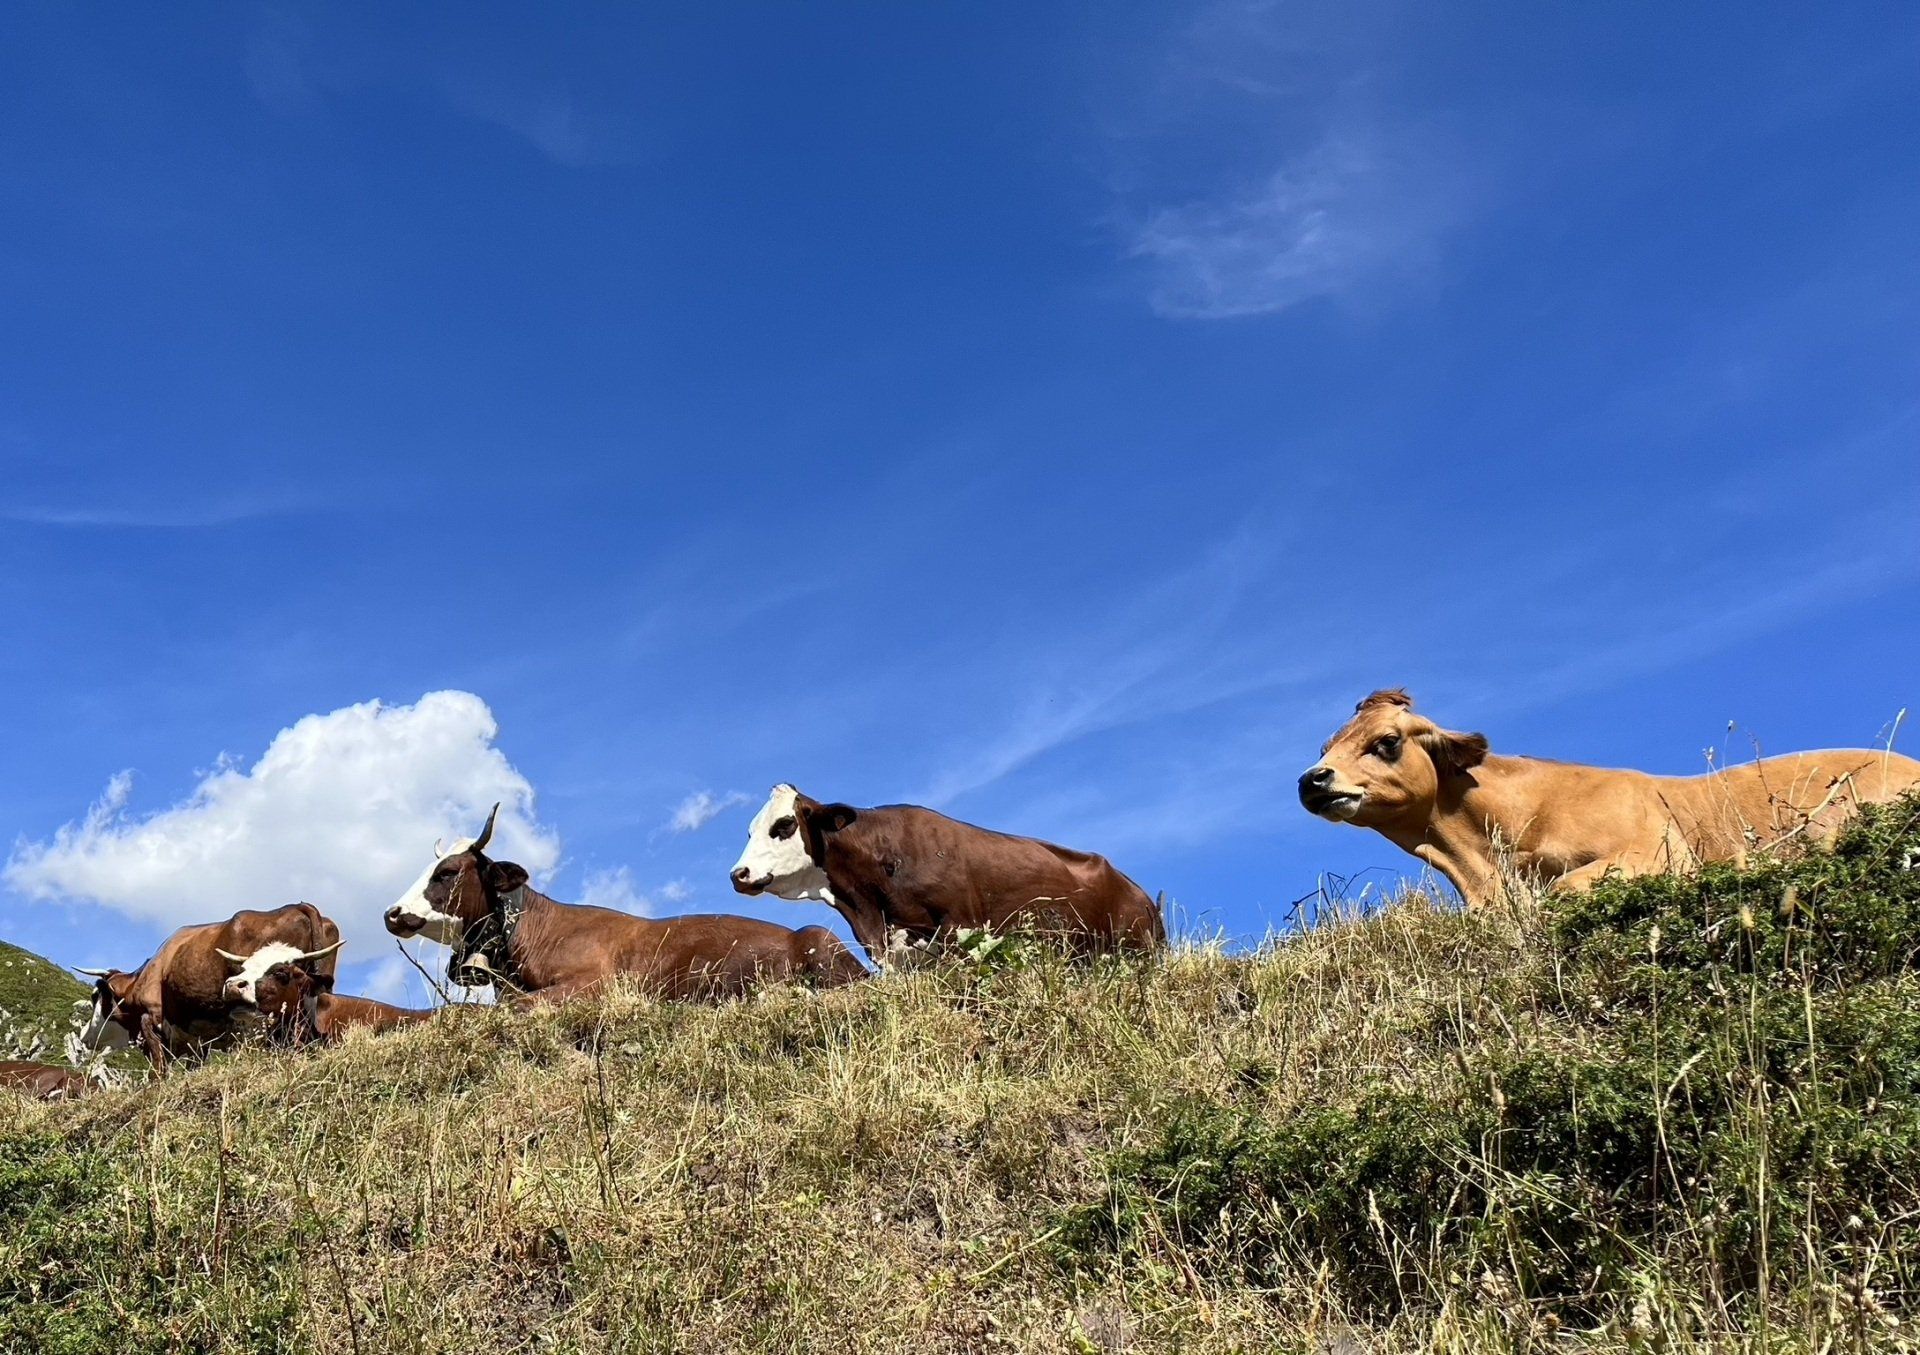 Cows relaxing on the Pasture